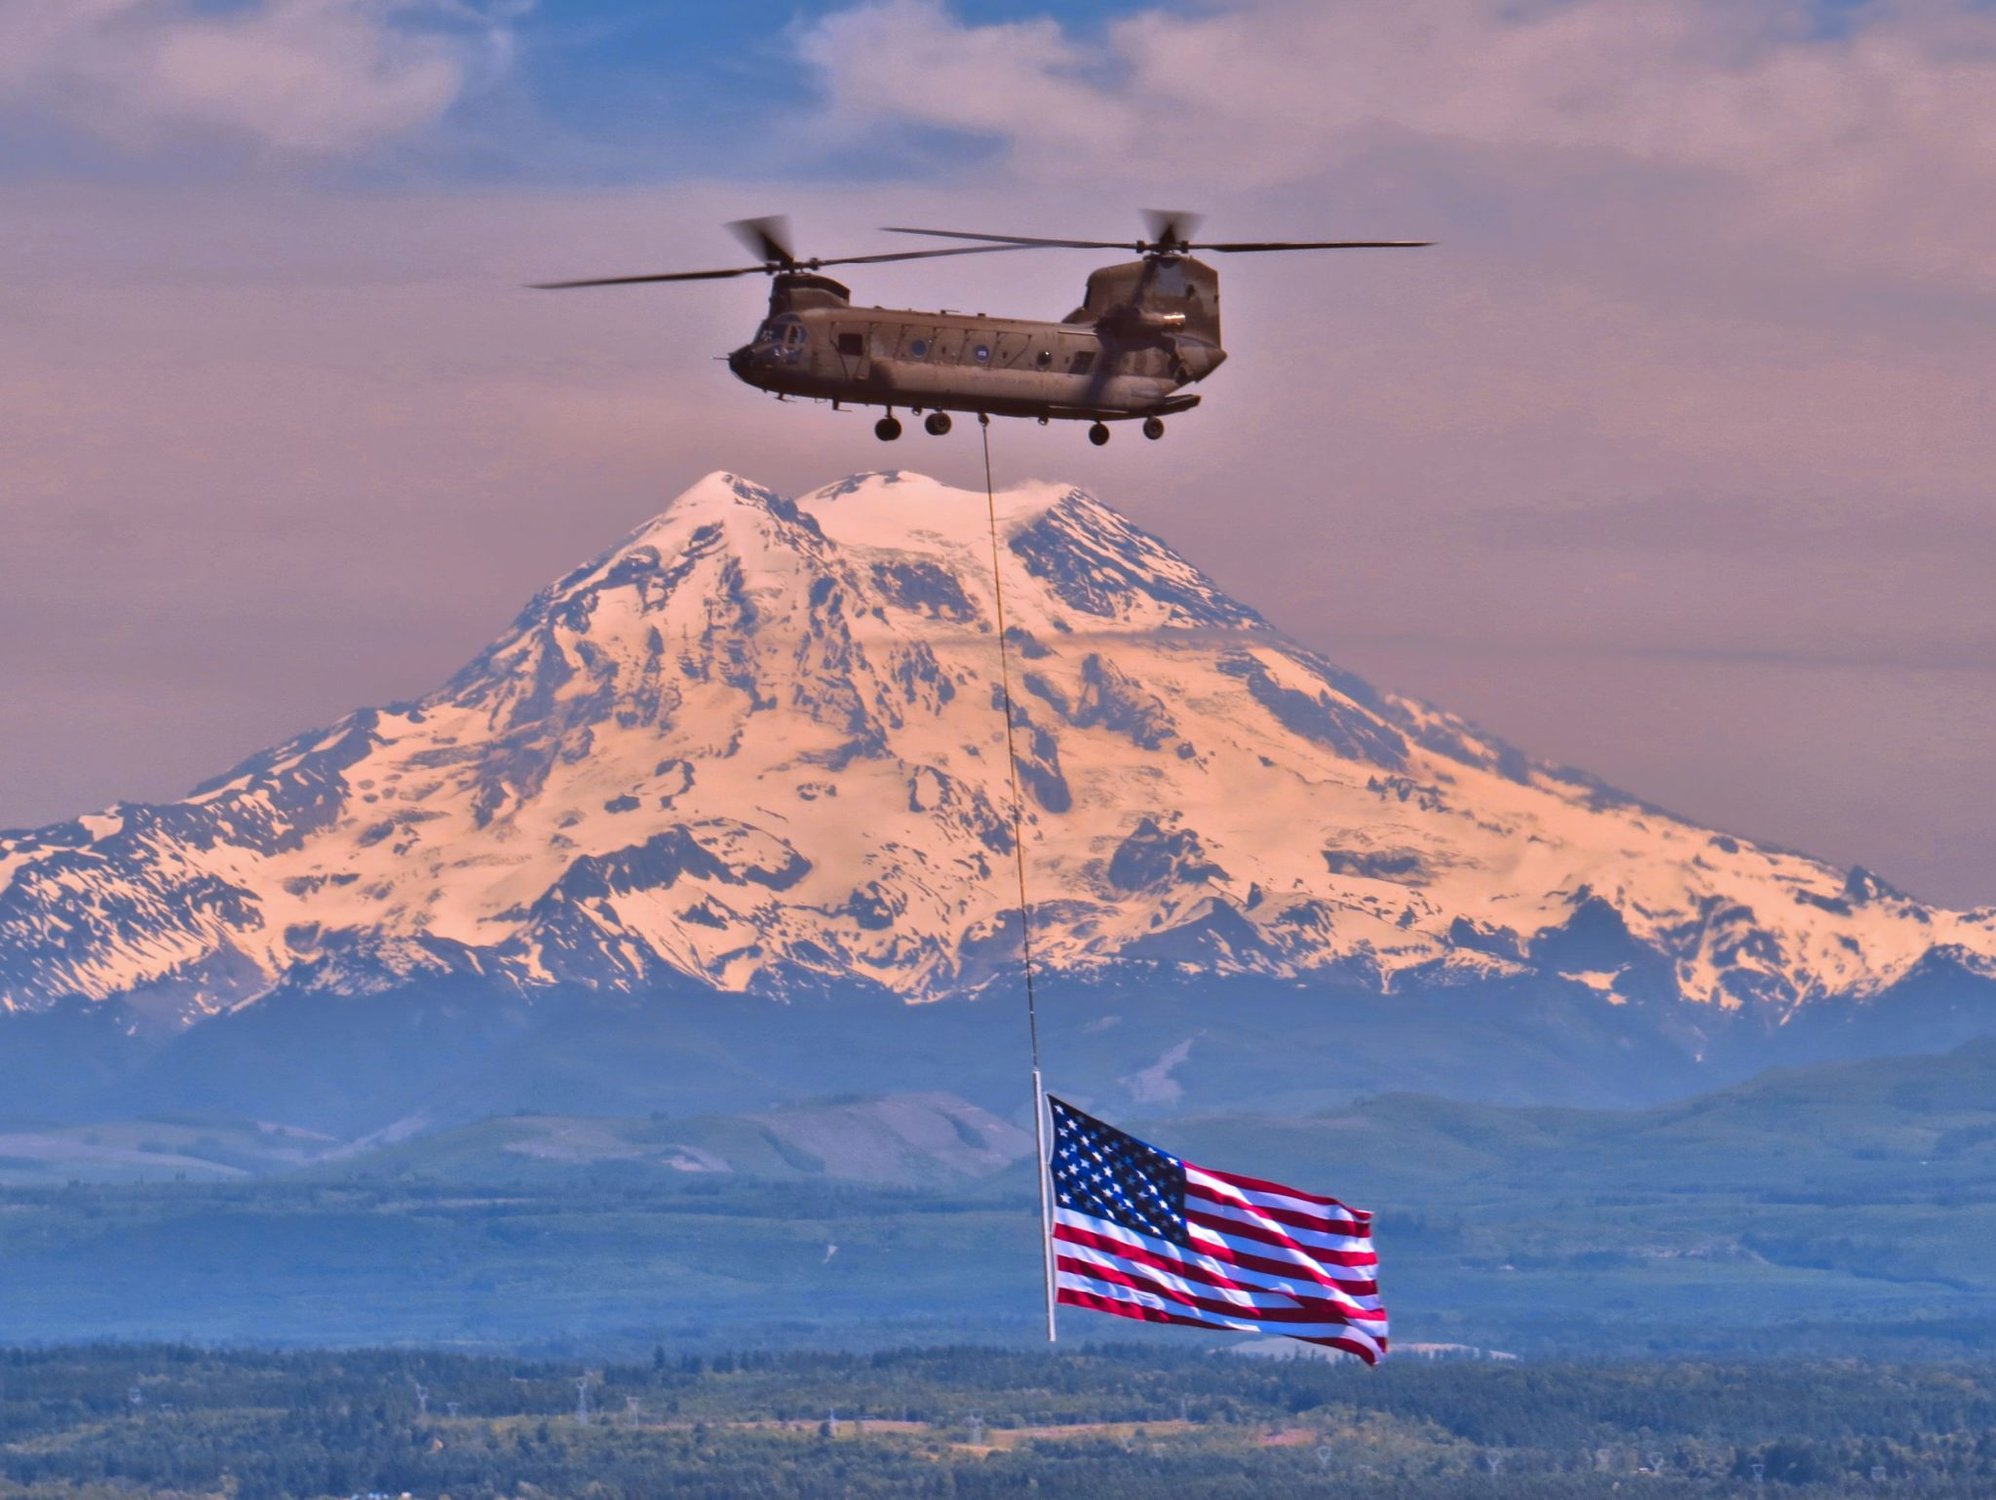 CW4 Tim Reeves and CW2 Kevin Crisp, 1-168th GSAB, Washington National Guard, perform a "flag drag" high above Puget Sound on their way to Gas Work Park in Seattle as part of the Seattle Seafair 4th of July celebration. (Photo by SFC Adolf Pinlac, D Co. 1/168th GSAB)